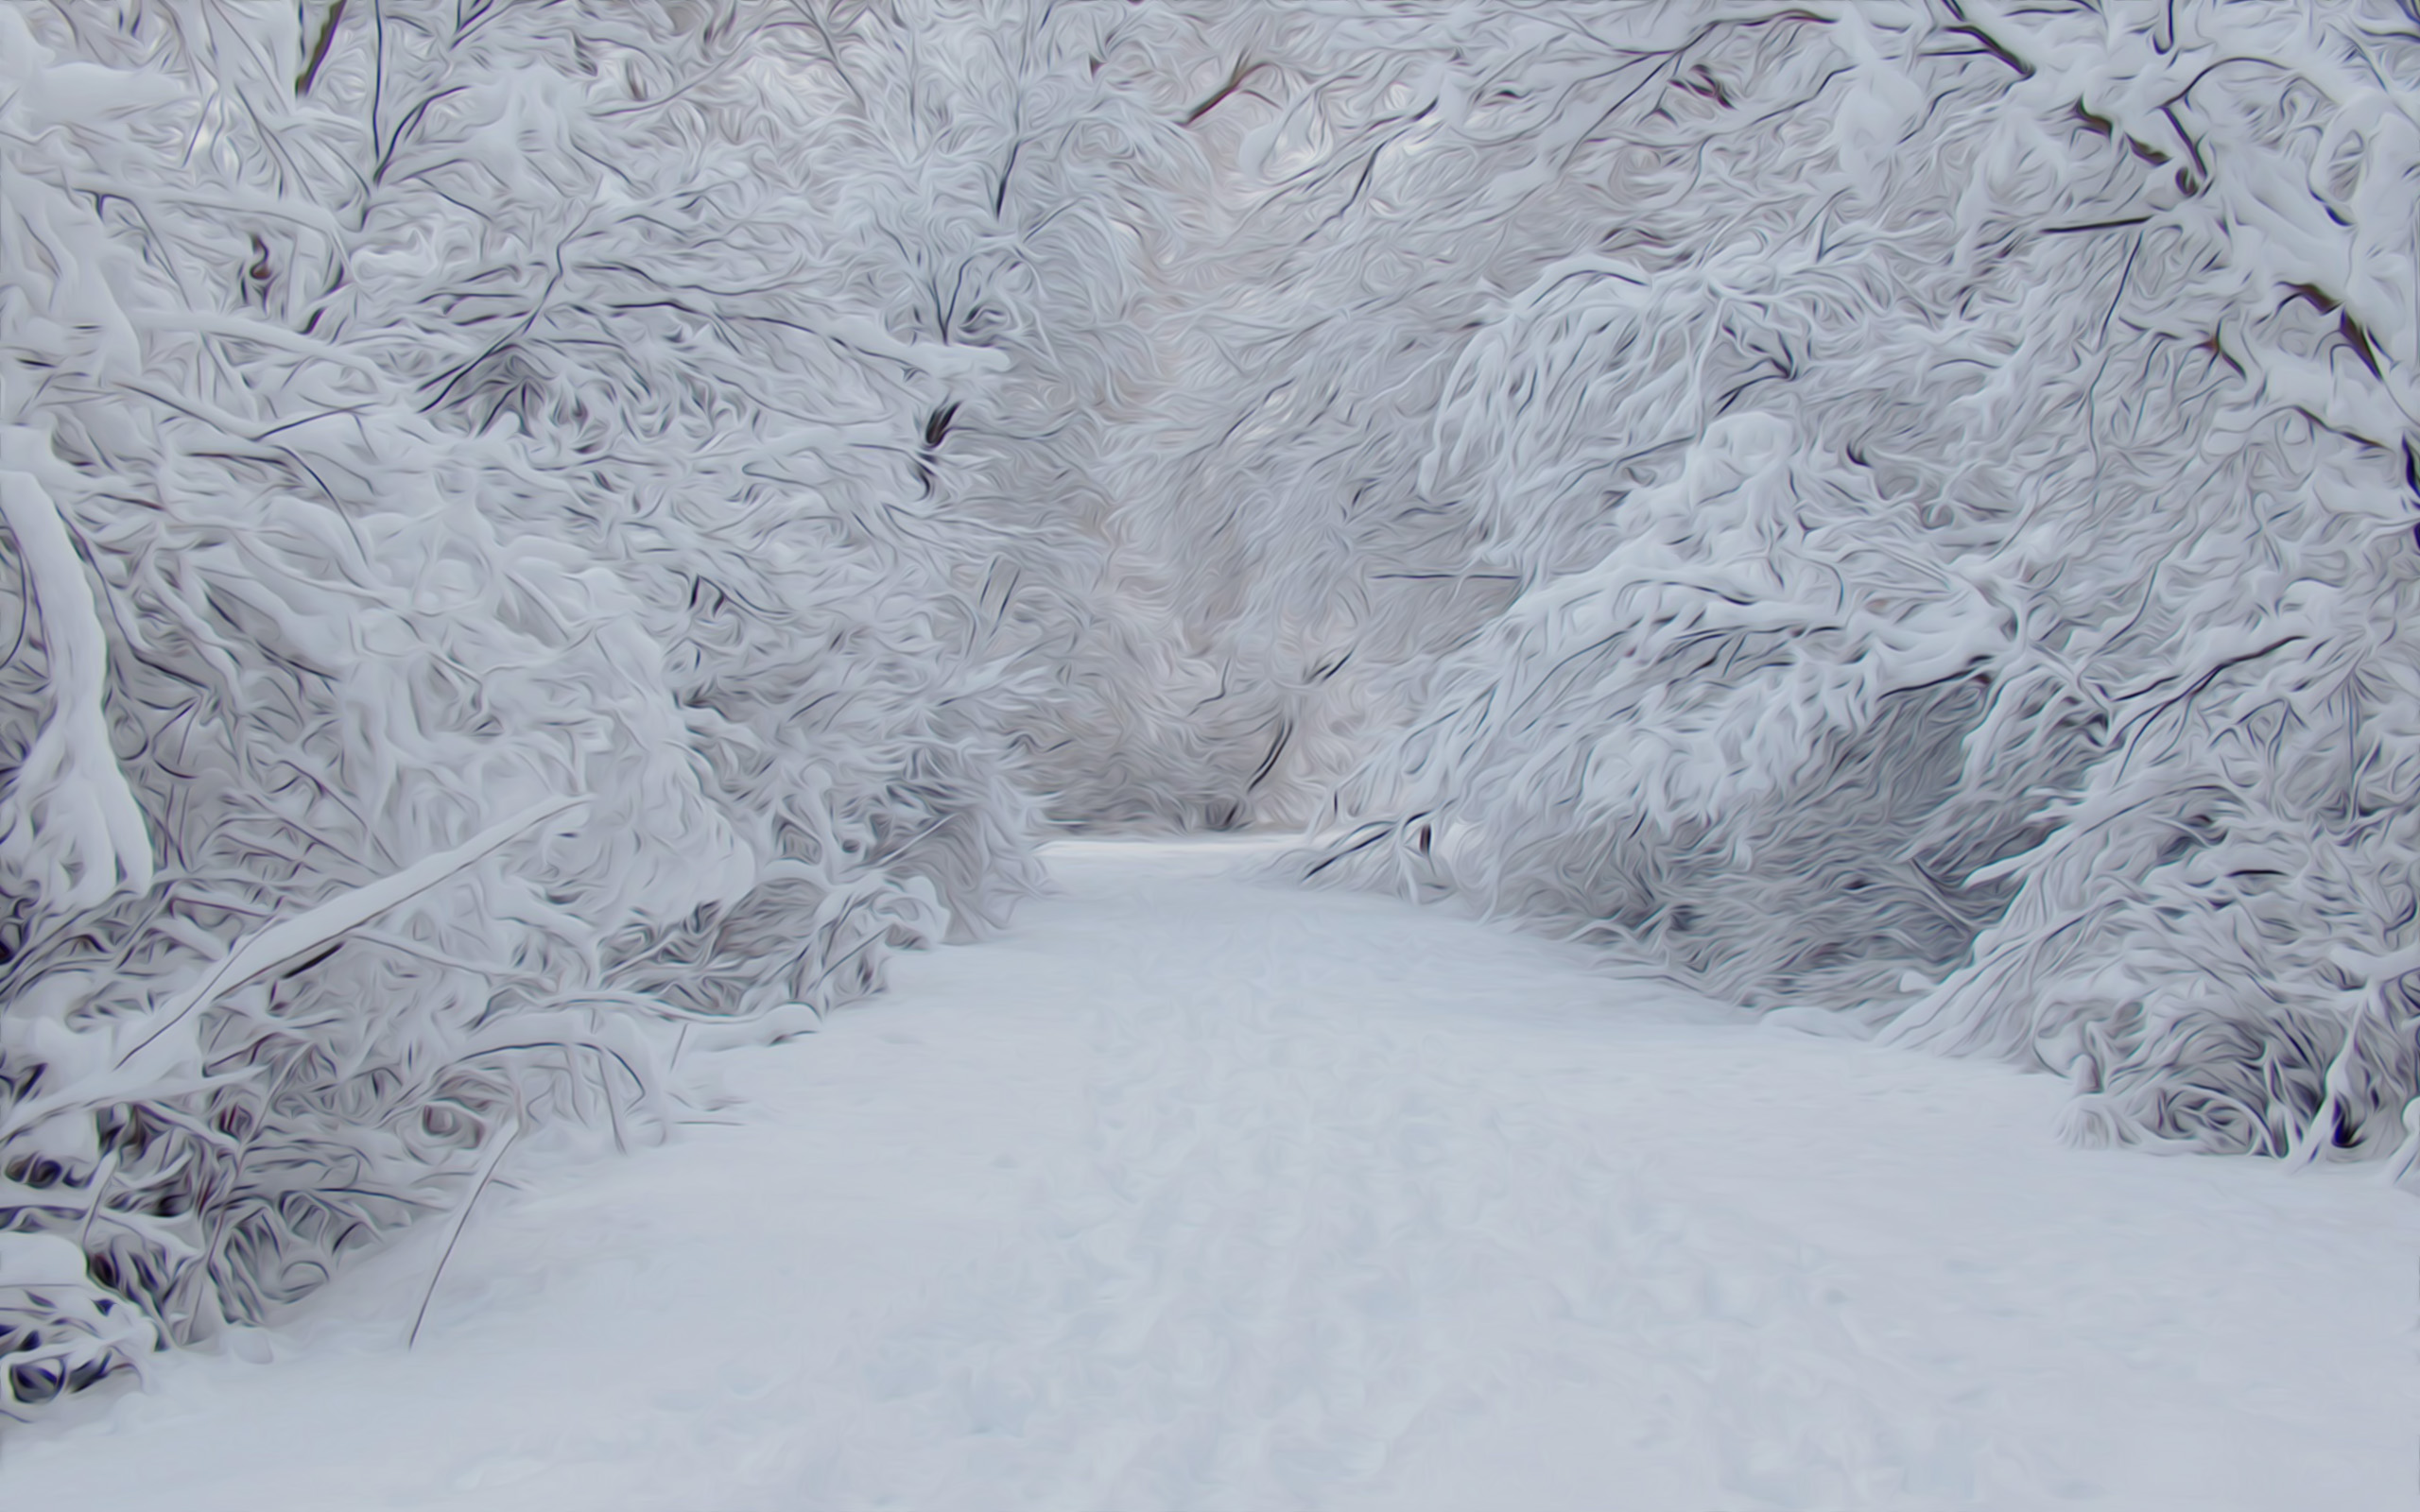 Winter images snowy snow HD wallpaper and background photos